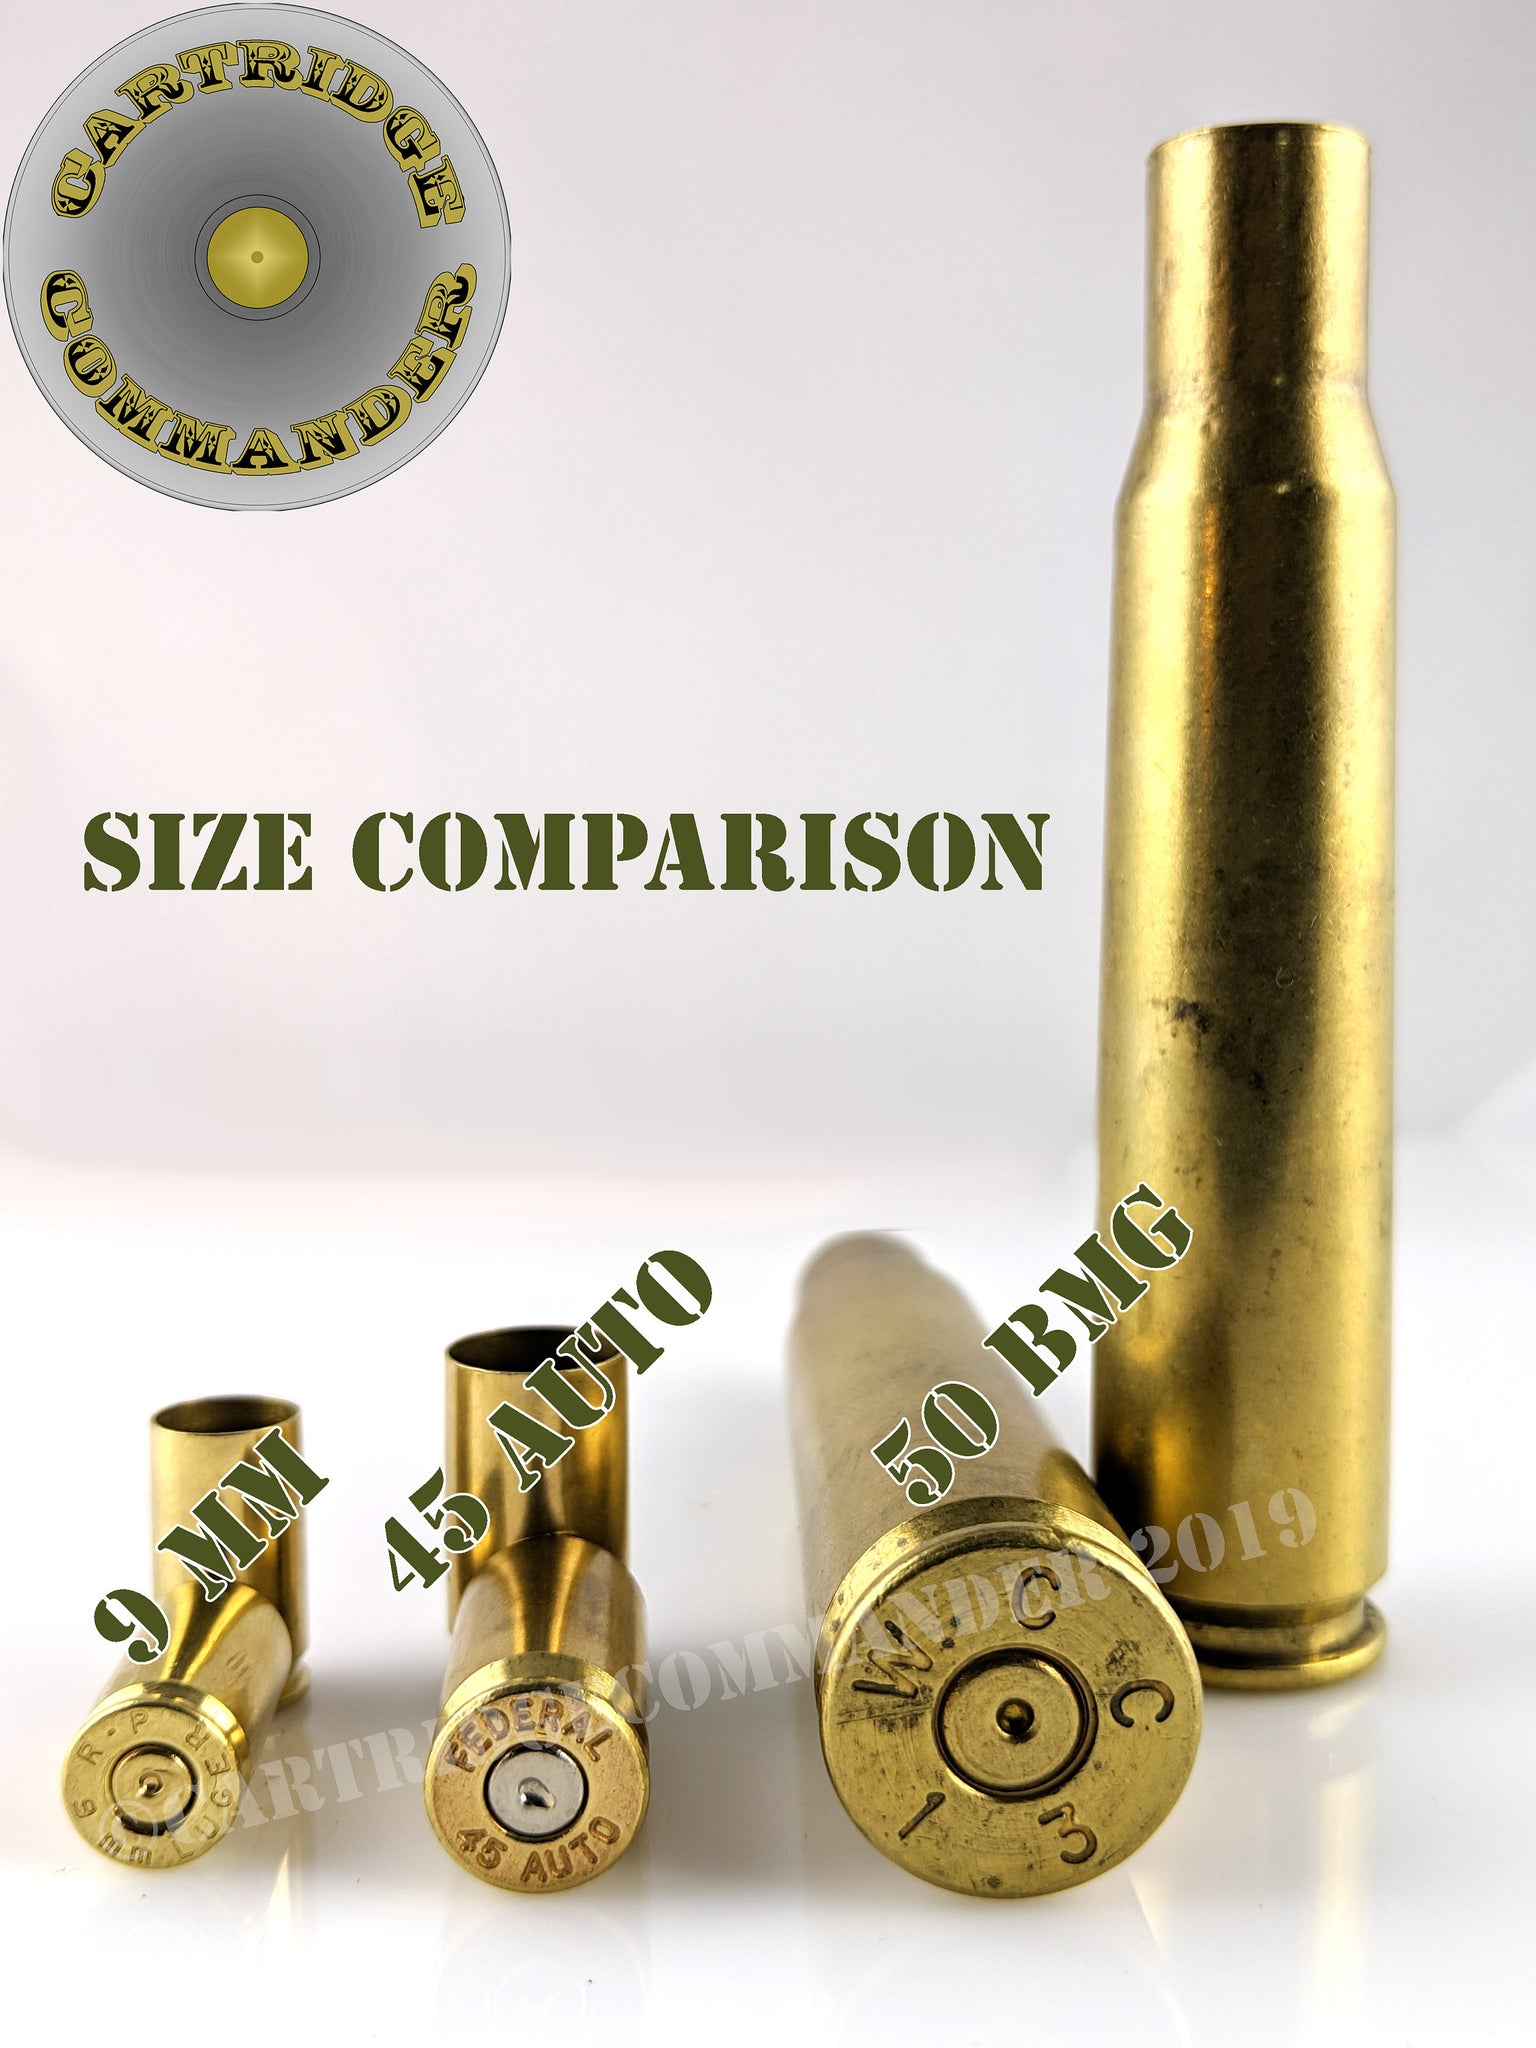 50 BMG brass thincut bullet slices, mix mfg, 10-pack – Cartridge Commander